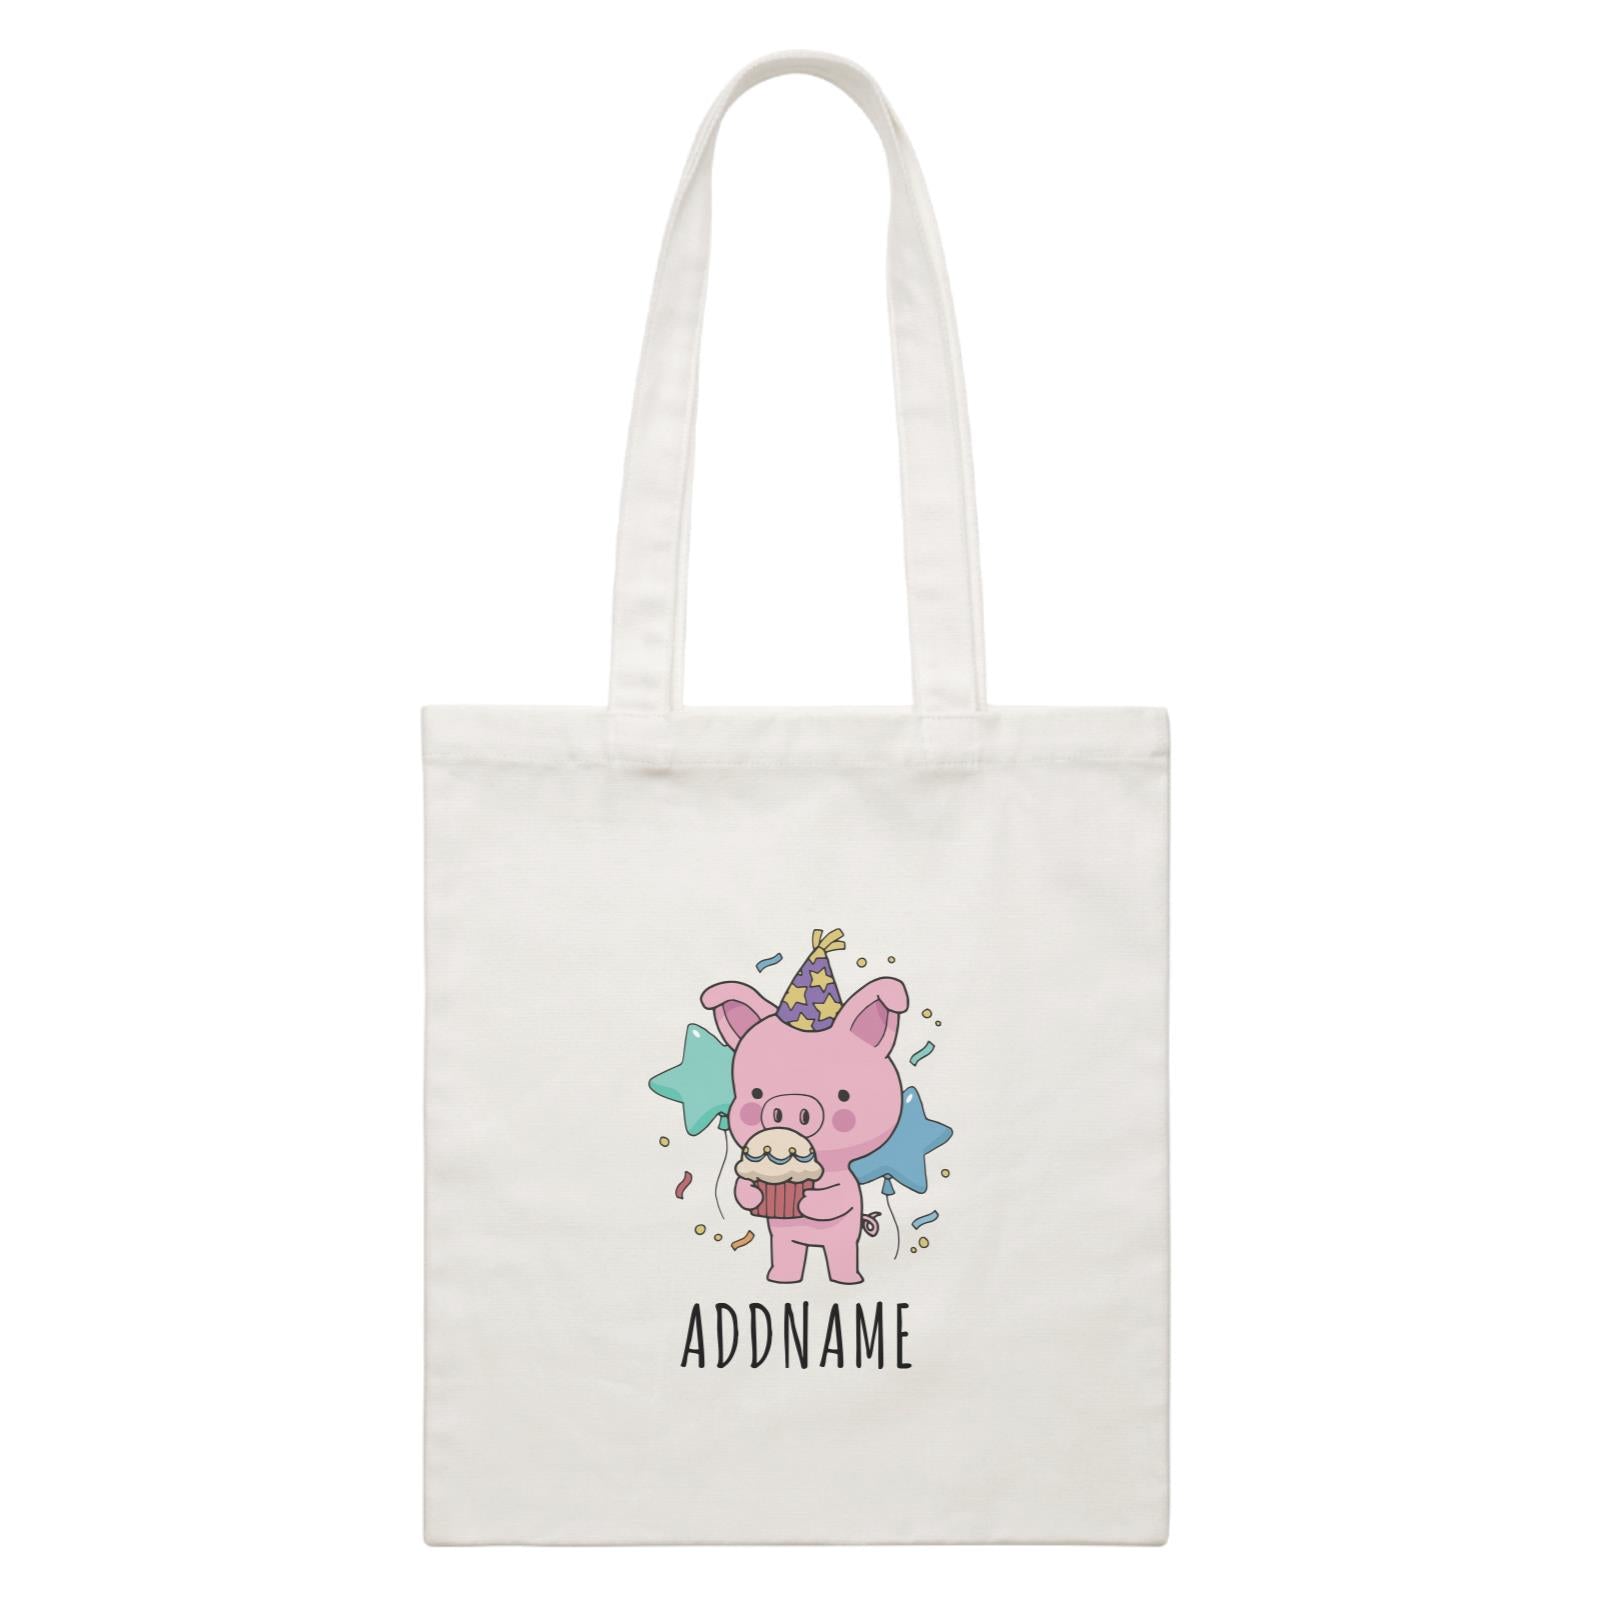 Birthday Sketch Animals Pig with Party Hat Eating Cupcake Addname White Canvas Bag